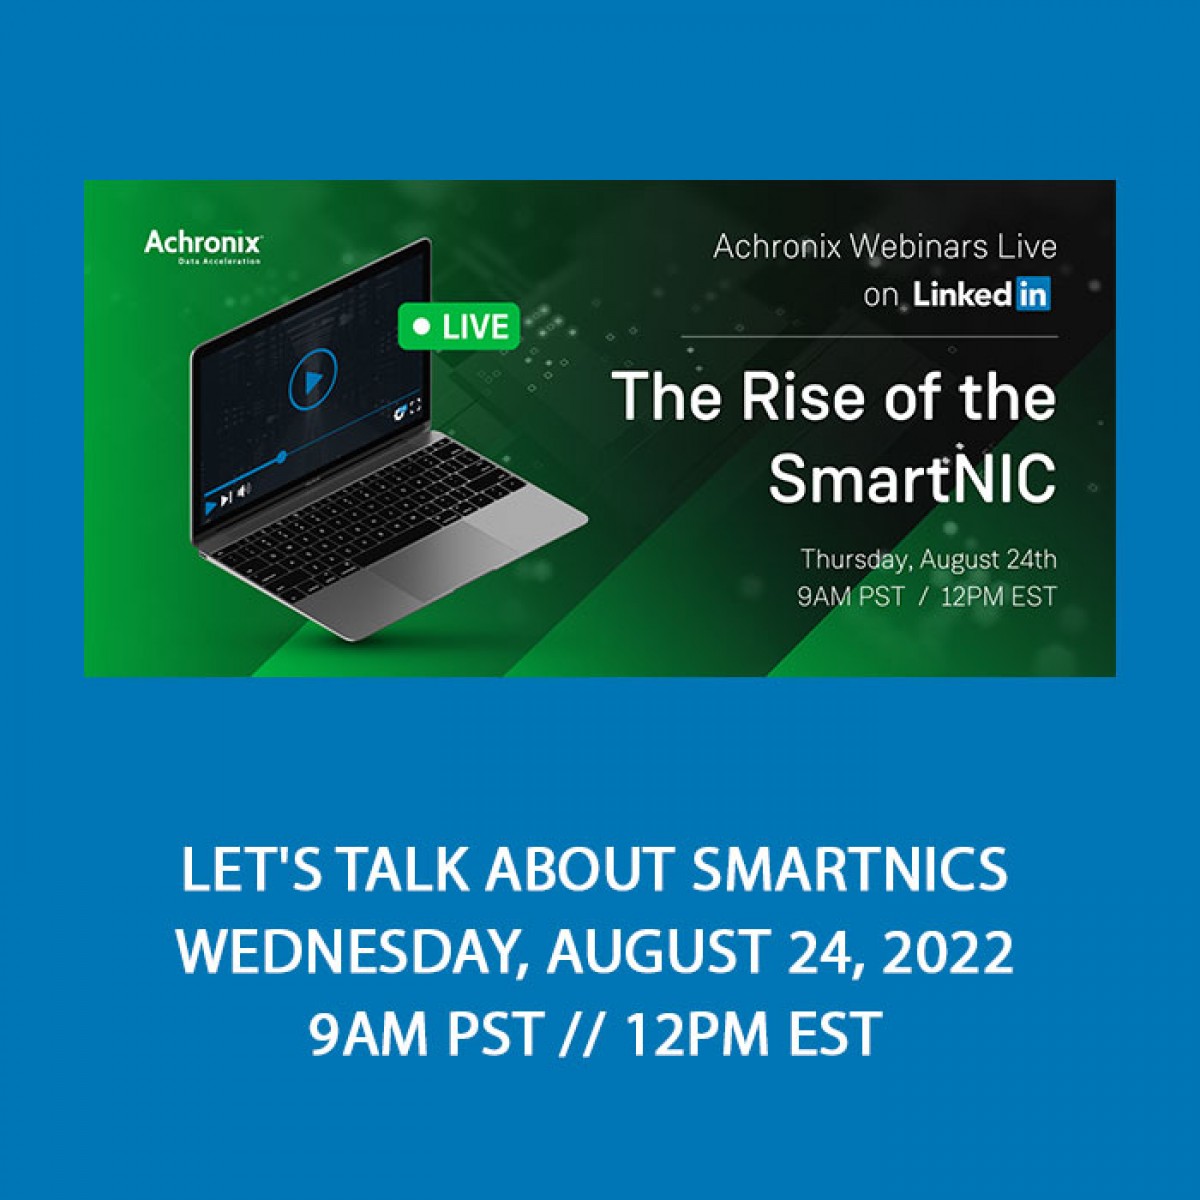 Let's talk about SmartNICs - Wednesday, August 24, 2022